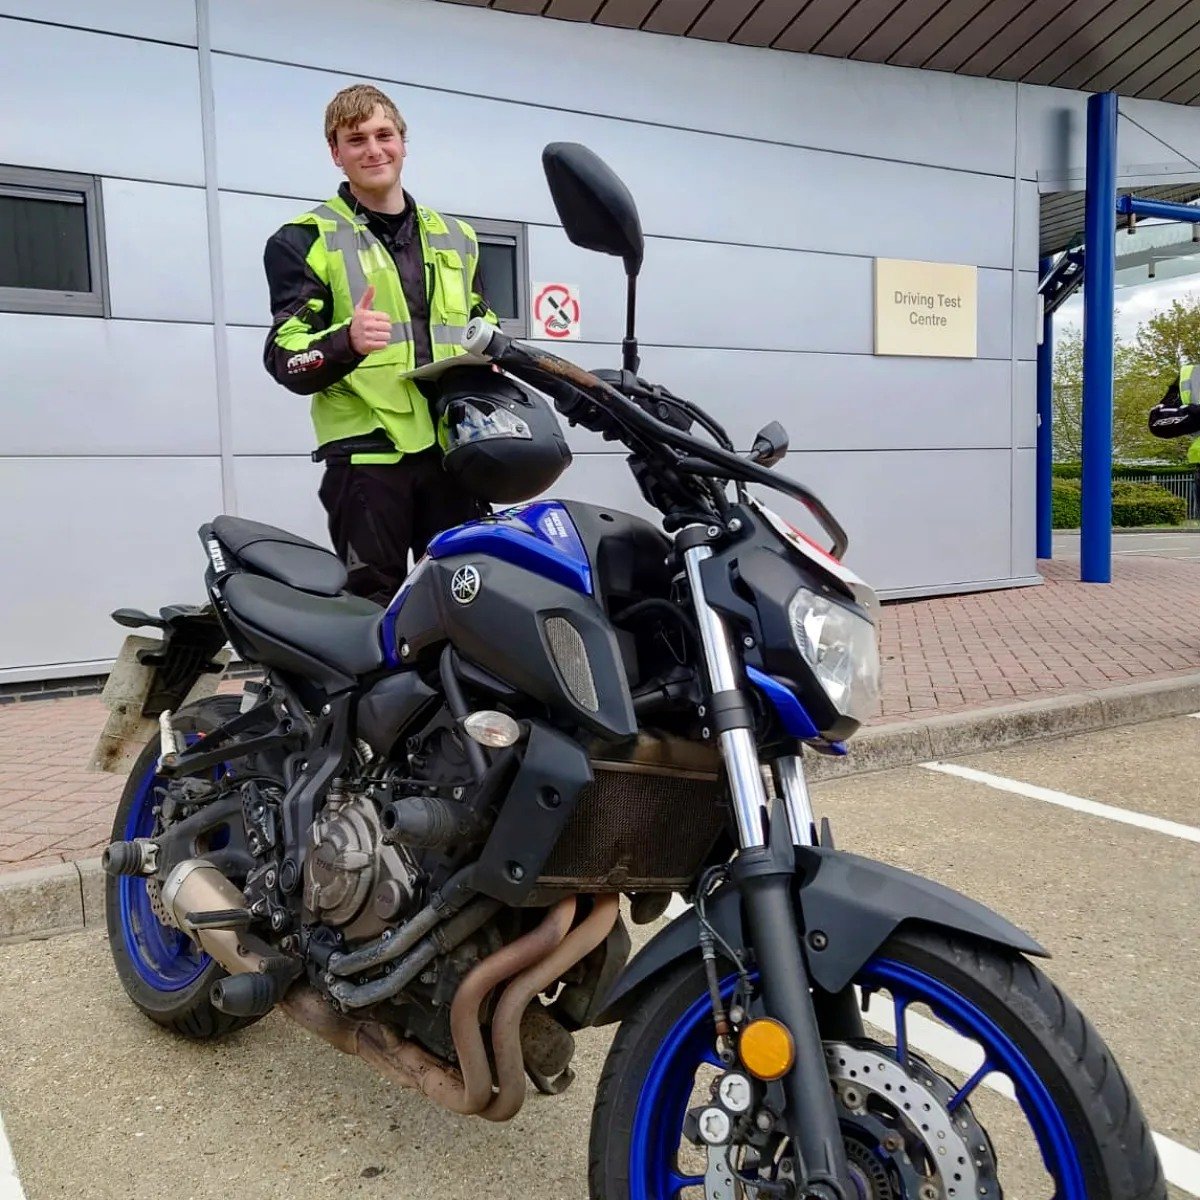 Easy A2 Licence pass for Kirk😎

Good to see students riding their own bikes regularly after CBT & it was clear from his riding assessment, he'd kept himself & any bad habits in check. 
Minimal correction needed for his test!👏

#artmct #phmotorcycles #a2licence #yamahamt07 #dvsa